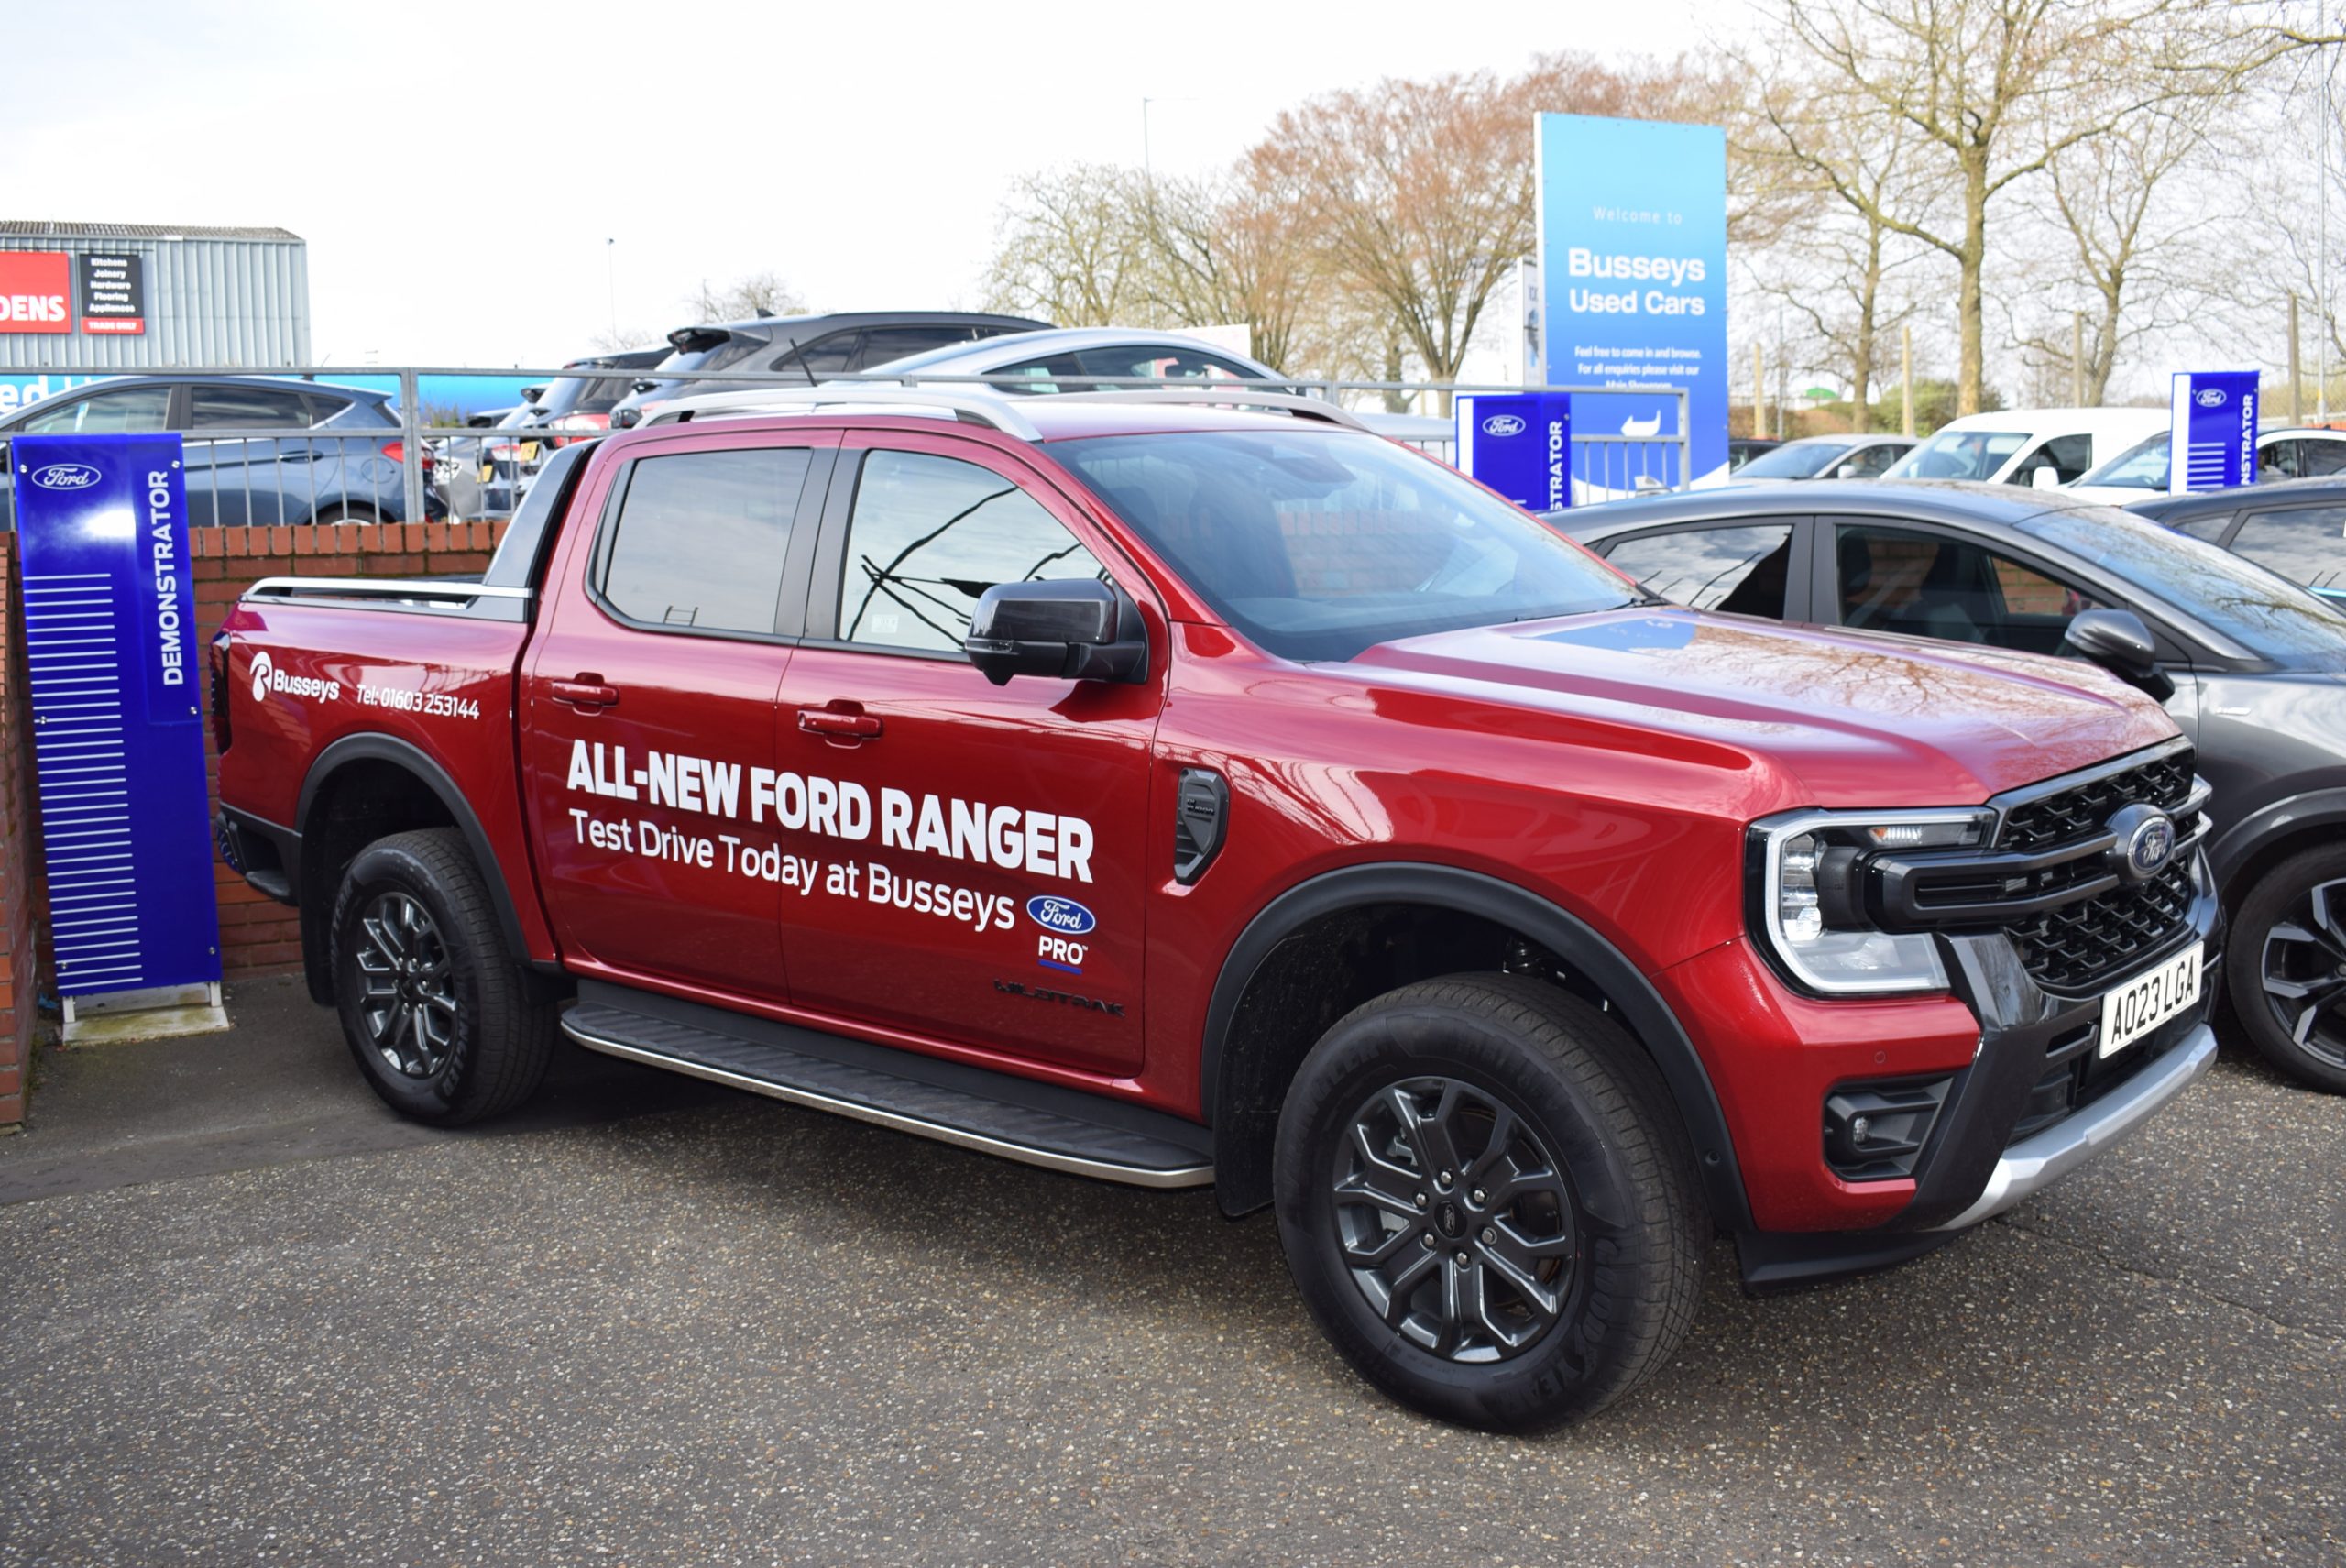 All-New Ranger- Now at Busseys ready for test drives